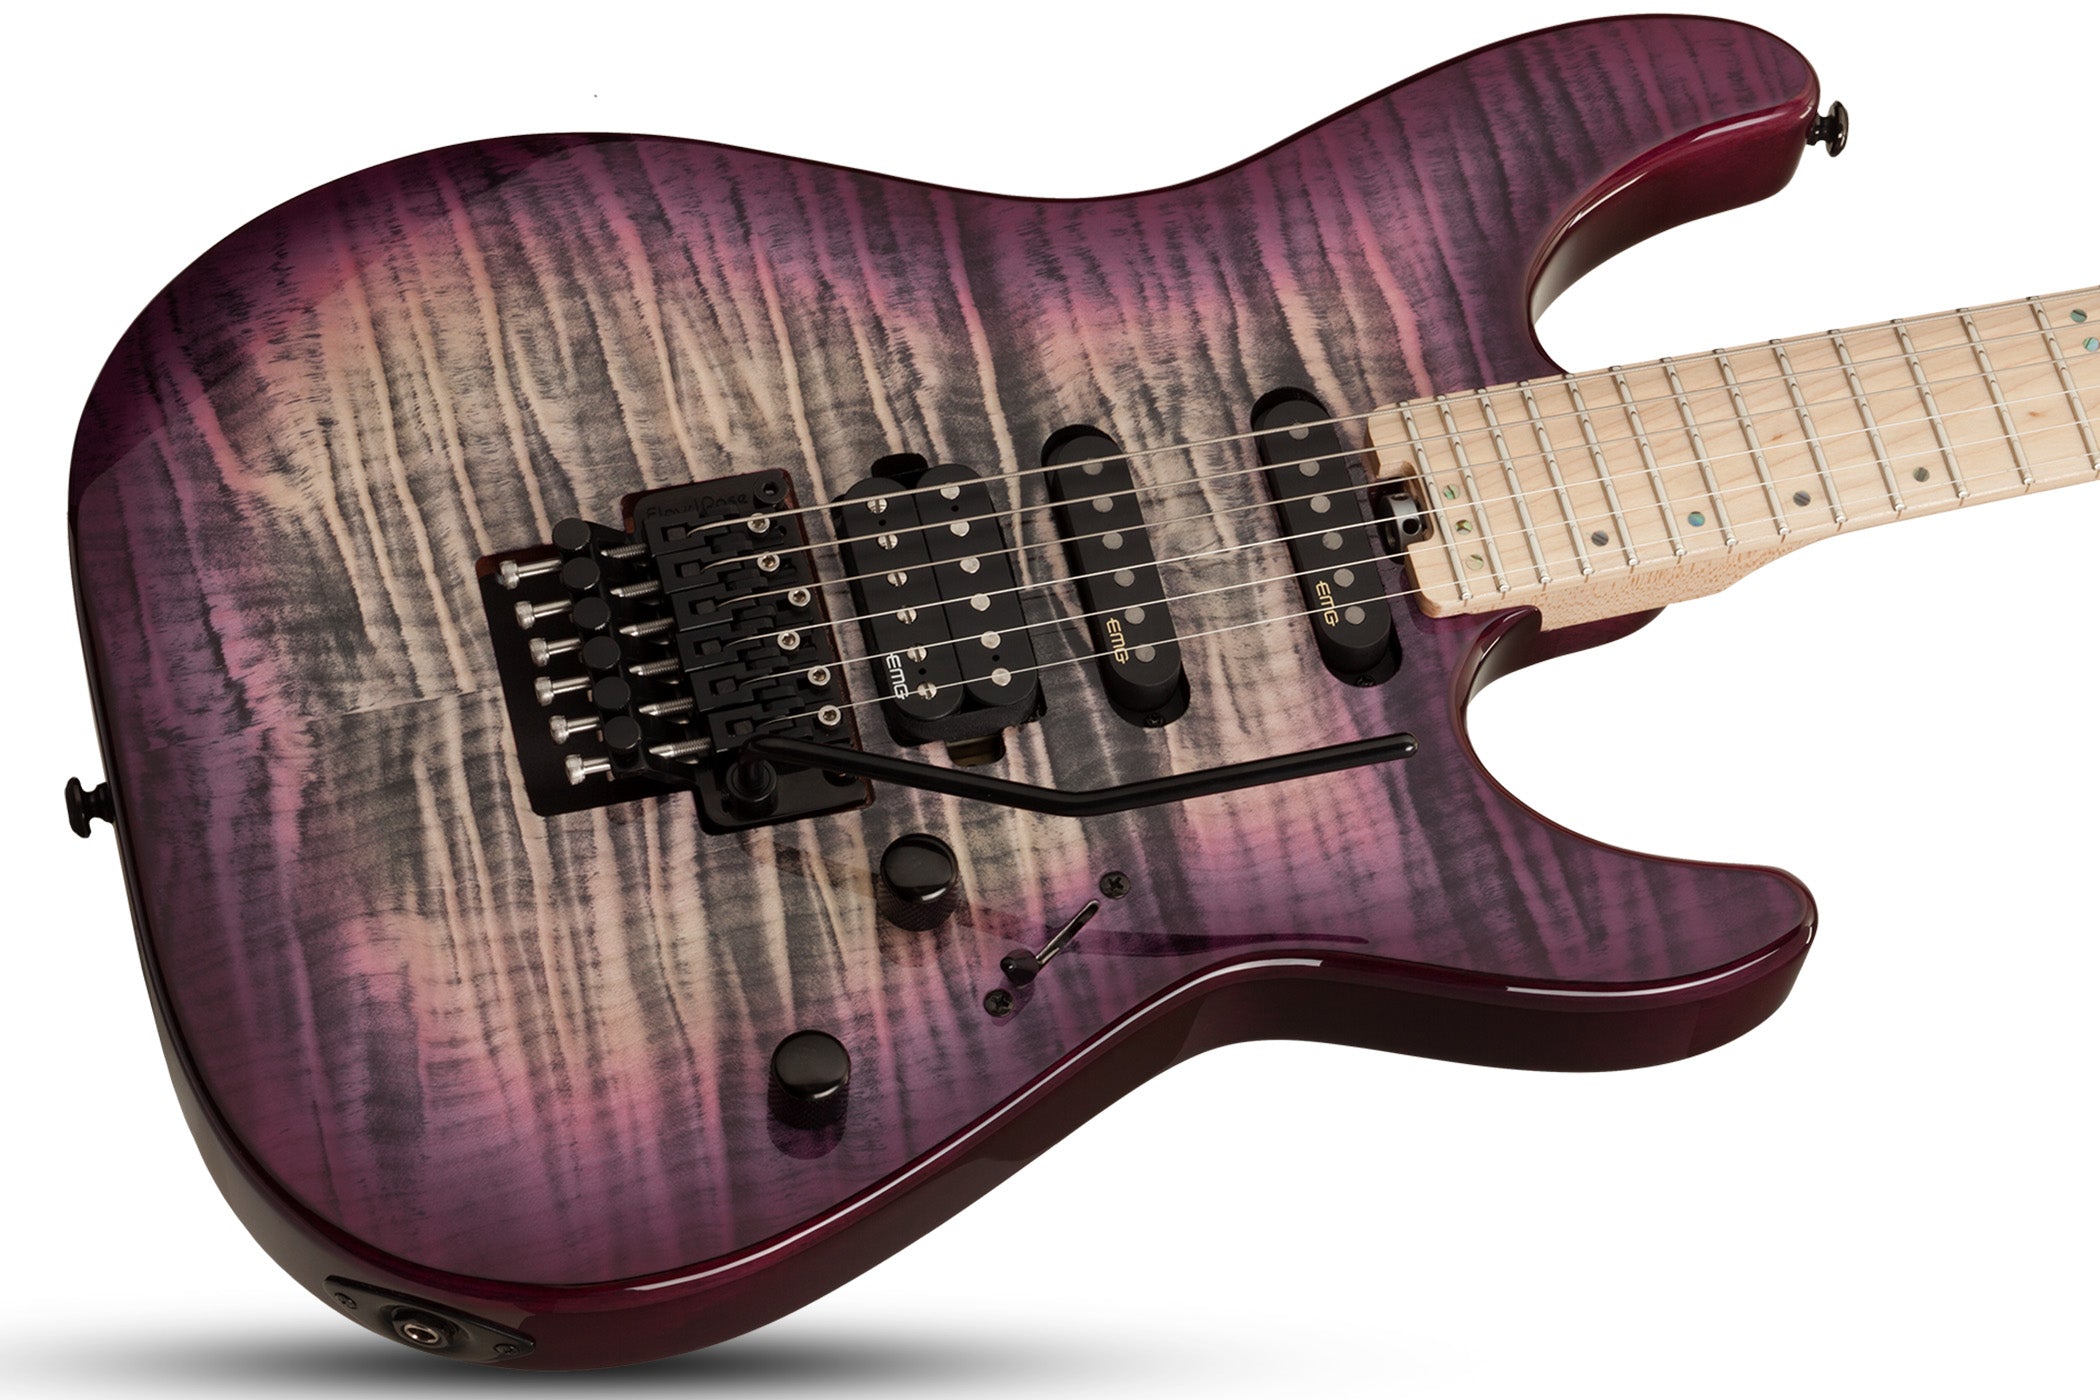 SCHECTER SUN VALLEY SUPER SHREDDER III FR ELECTRIC GUITAR AURORA BURST COLOR (1276) MADE IN INDONESIA, SCHECTER, ELECTRIC GUITAR, schecter-electric-guitar-sunvalley-ss-fr-ab, ZOSO MUSIC SDN BHD